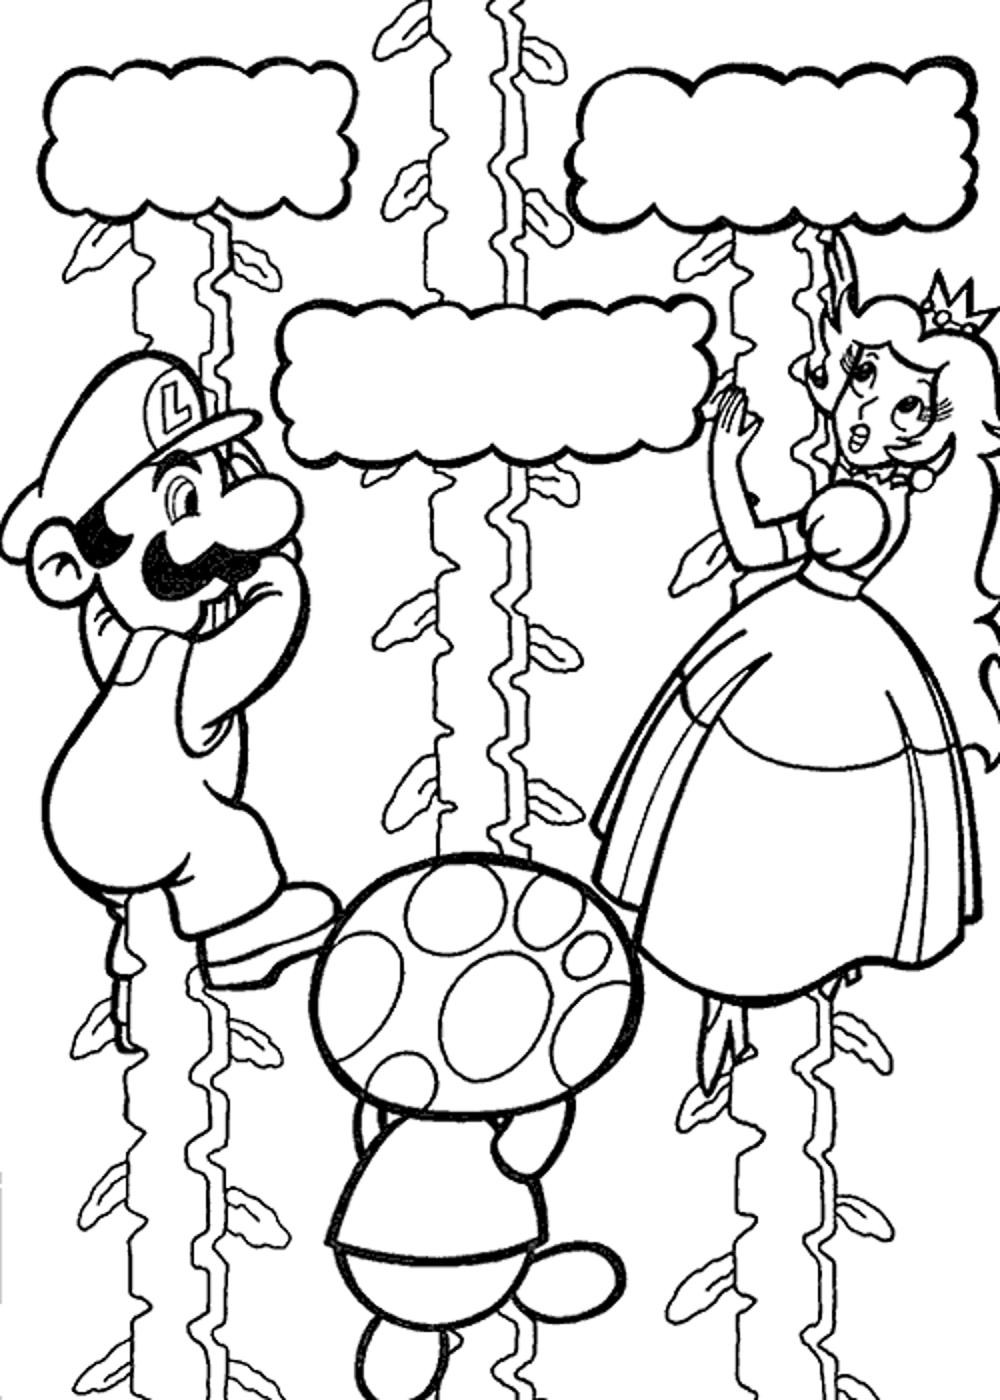 Super Mario Printable Coloring Pages
 super mario galaxy coloring pages – Best Apps For Kids